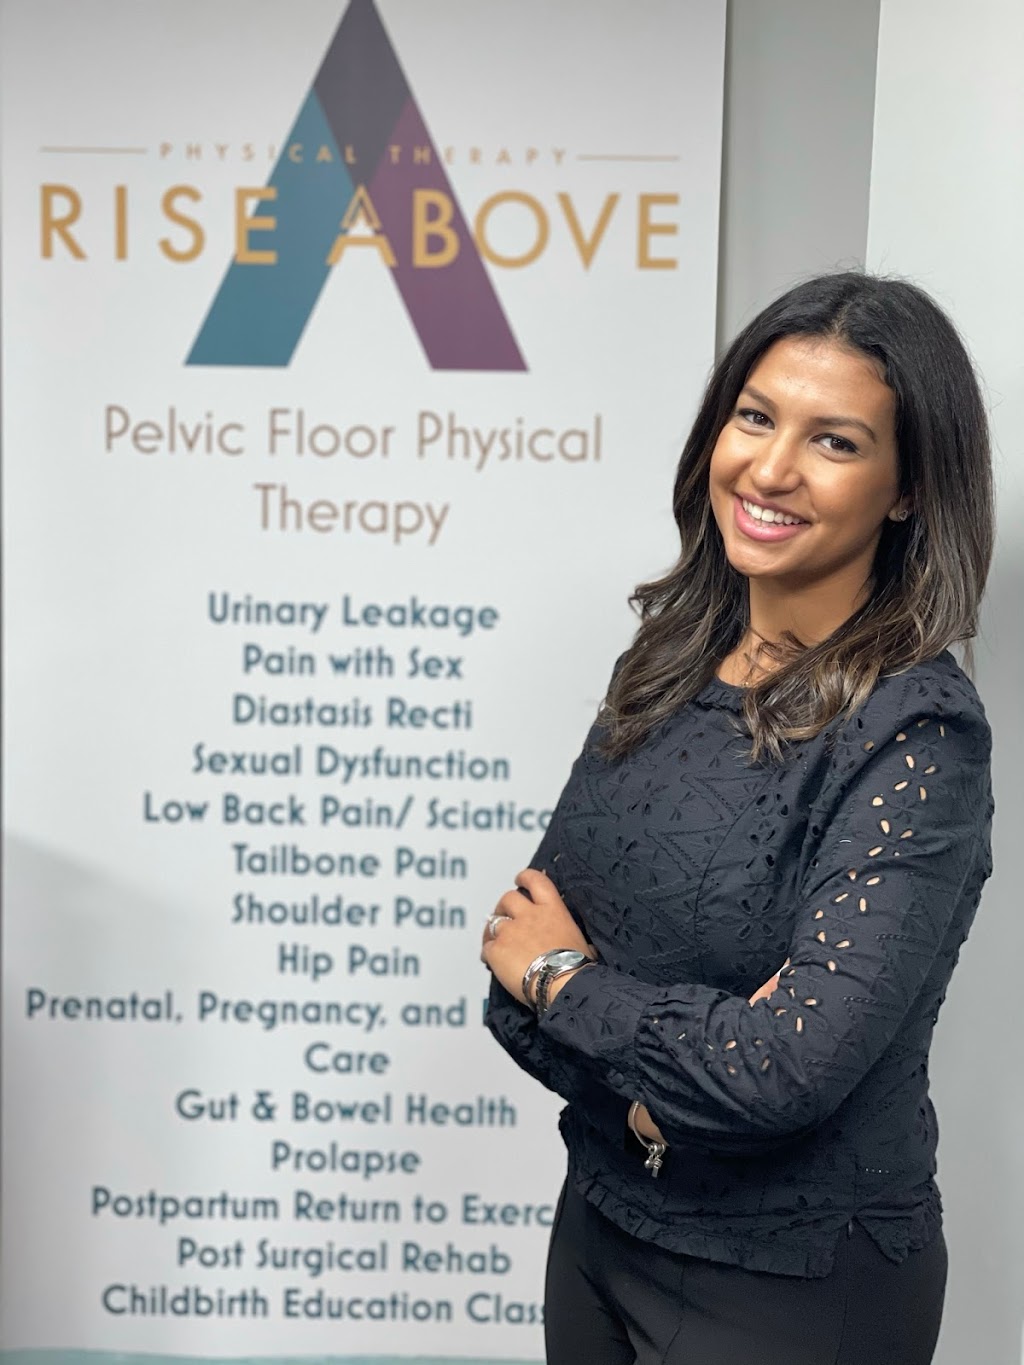 Rise Above Physical Therapy | 511 Goffle Rd Suite 203, Wyckoff, NJ 07481 | Phone: (201) 899-1166